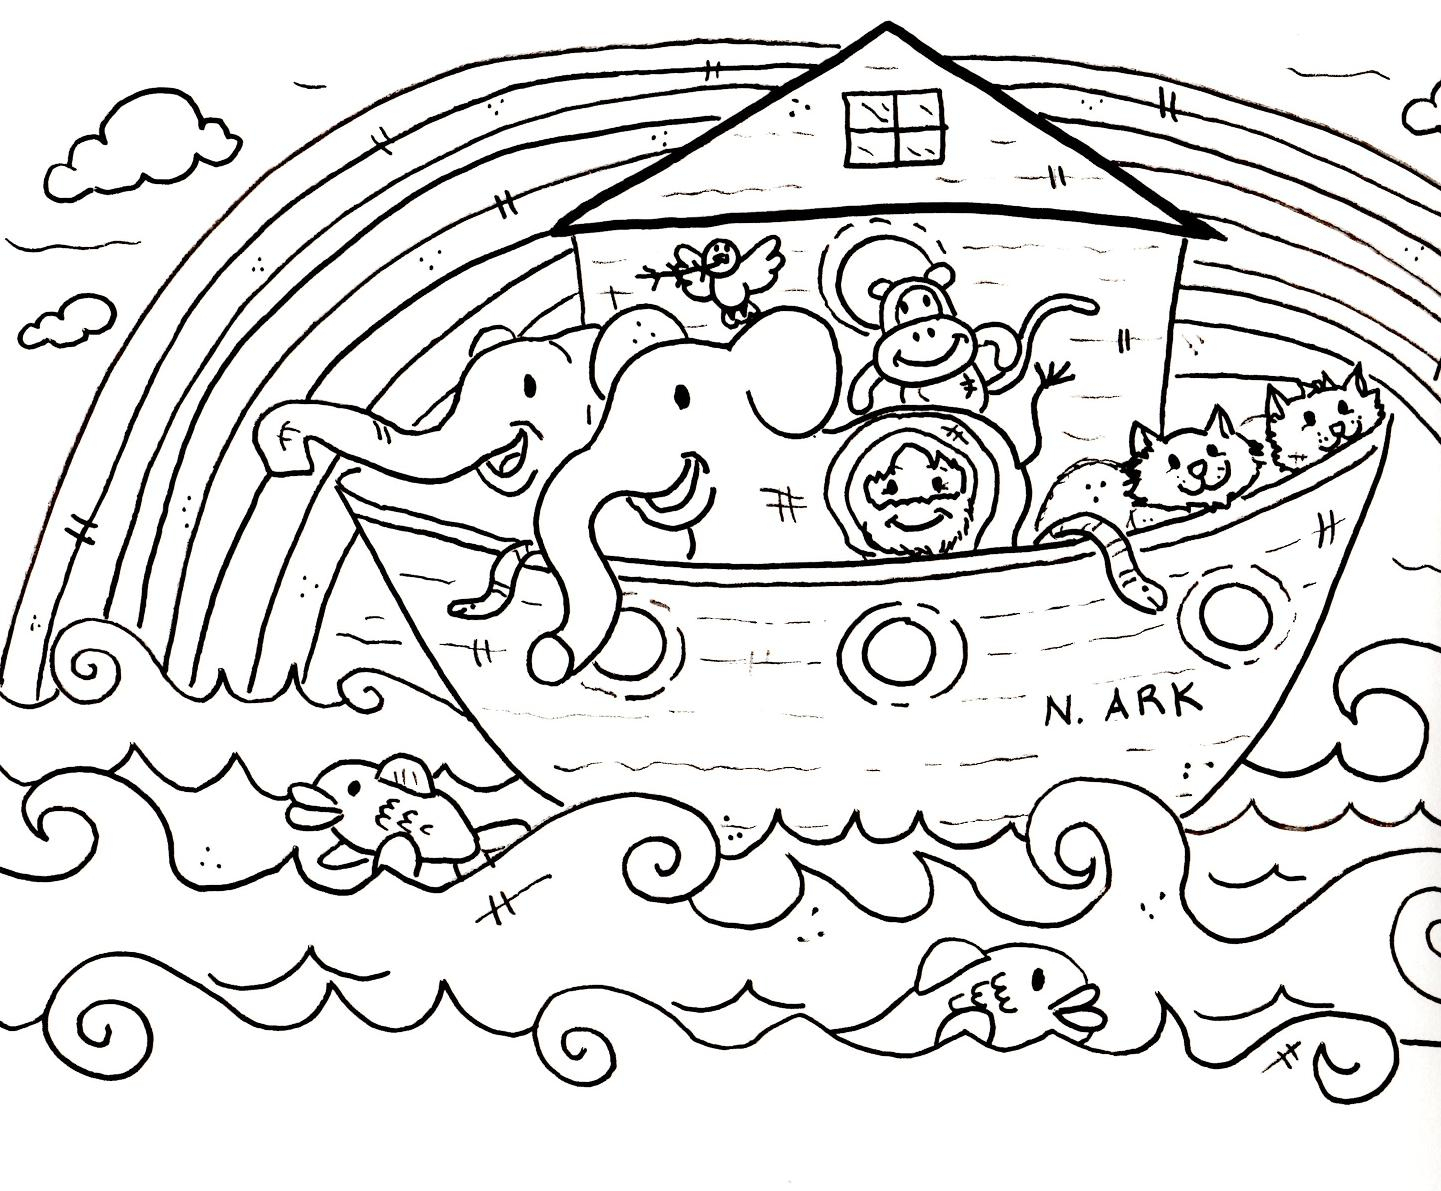 Coloring Pages : 53 Staggering Free Printable Bible Story Coloring - Free Printable Bible Coloring Pages